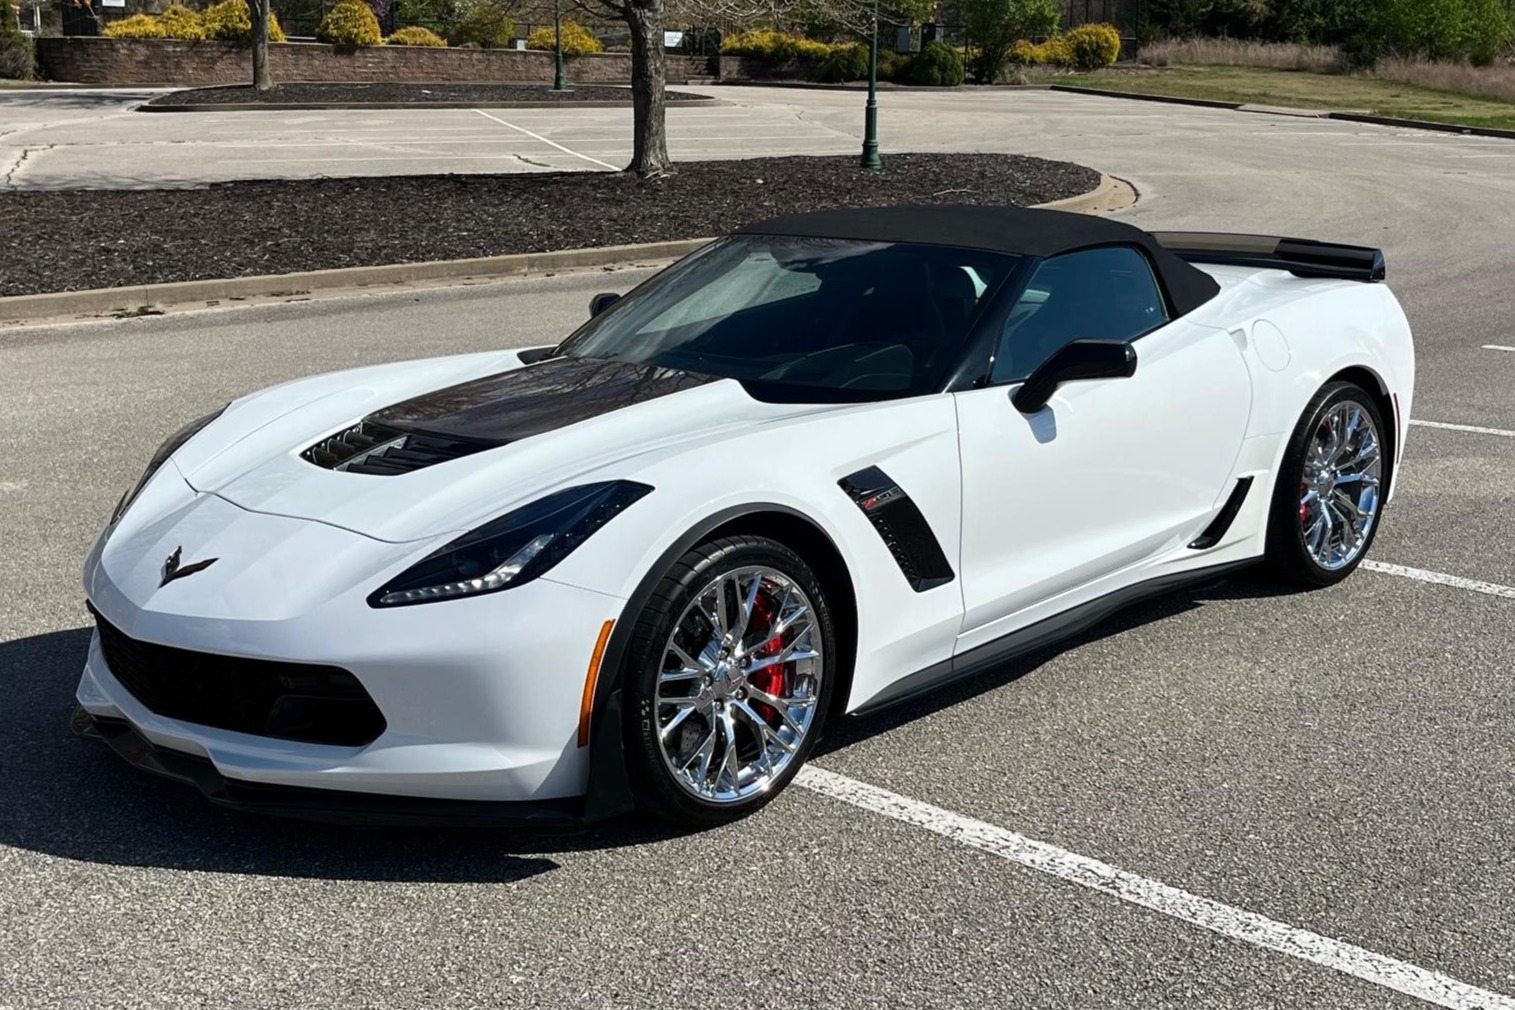 Top-down thrill: 2017 Chevy Corvette Convertible shines.